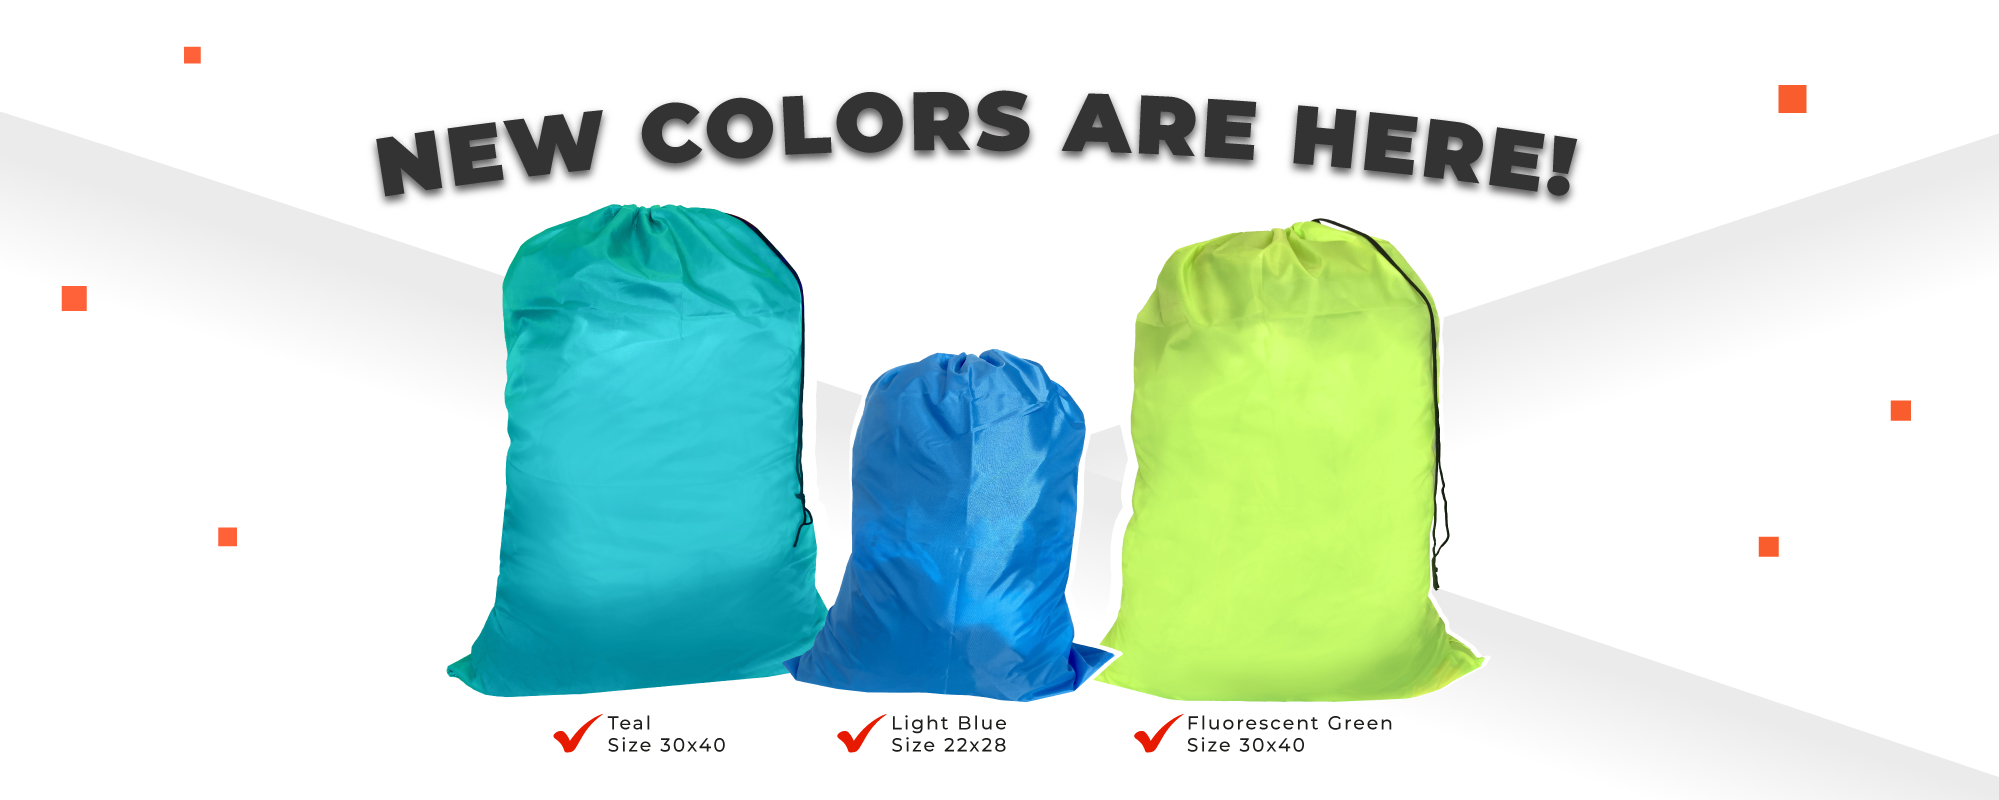 Teal, Fluorescent Green and Light Blue Polyester Bags